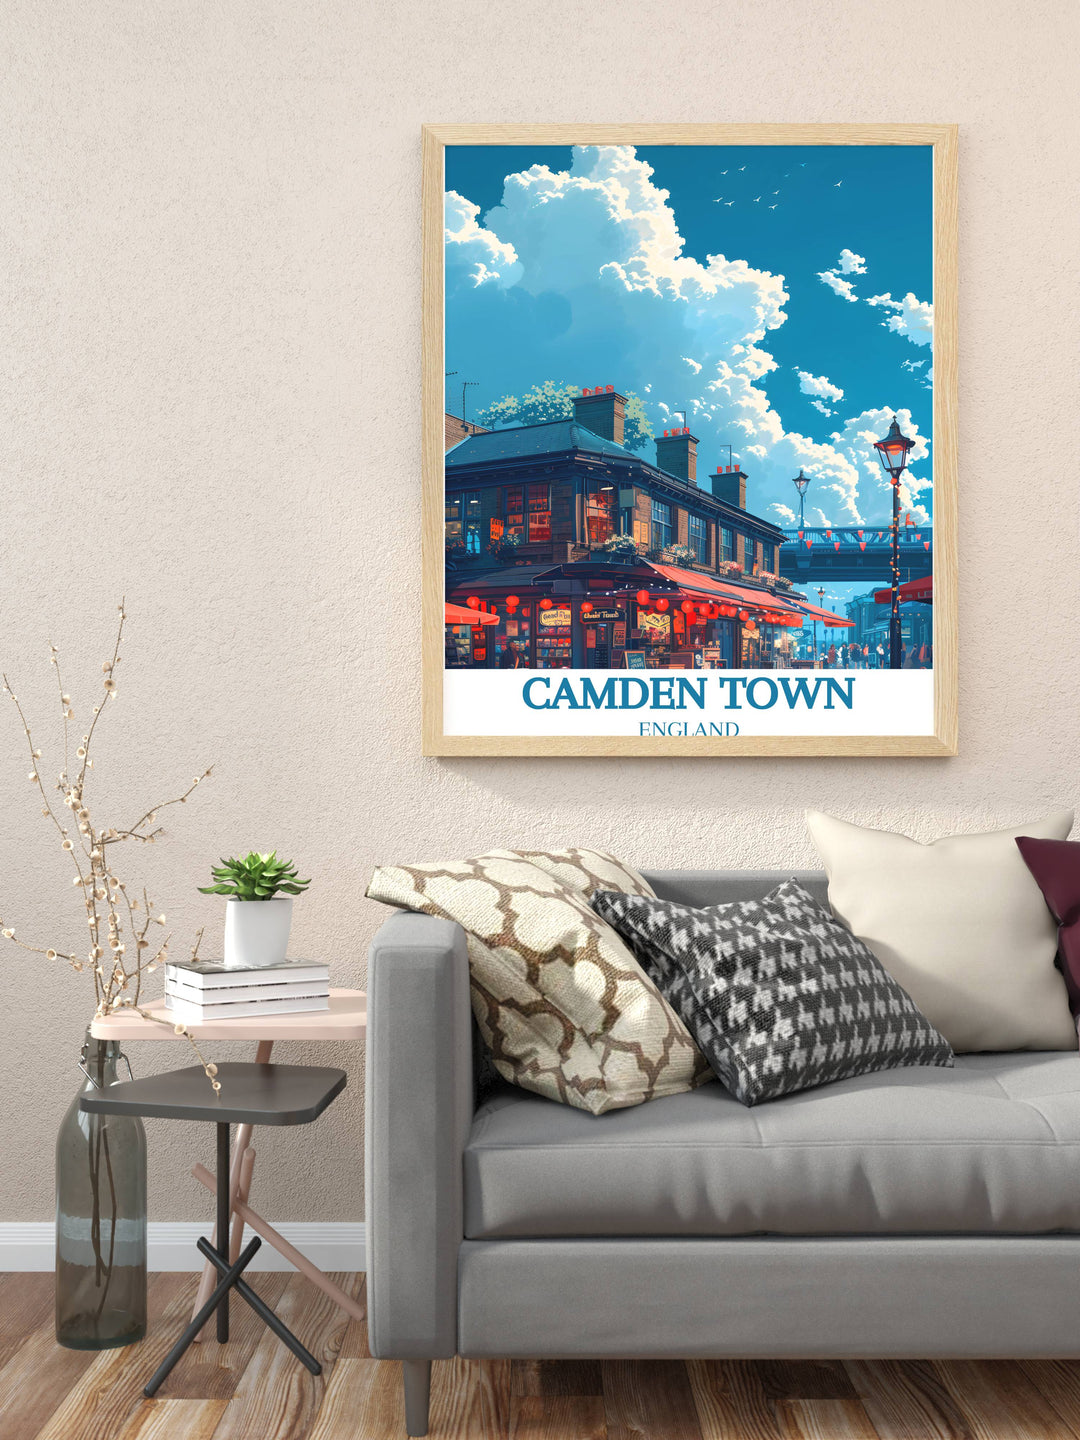 Framed print of Camden Market capturing the essence of this unique London destination with its rich colors and timeless design perfect for enhancing any room and evoking memories of past visits or inspiring future travels.